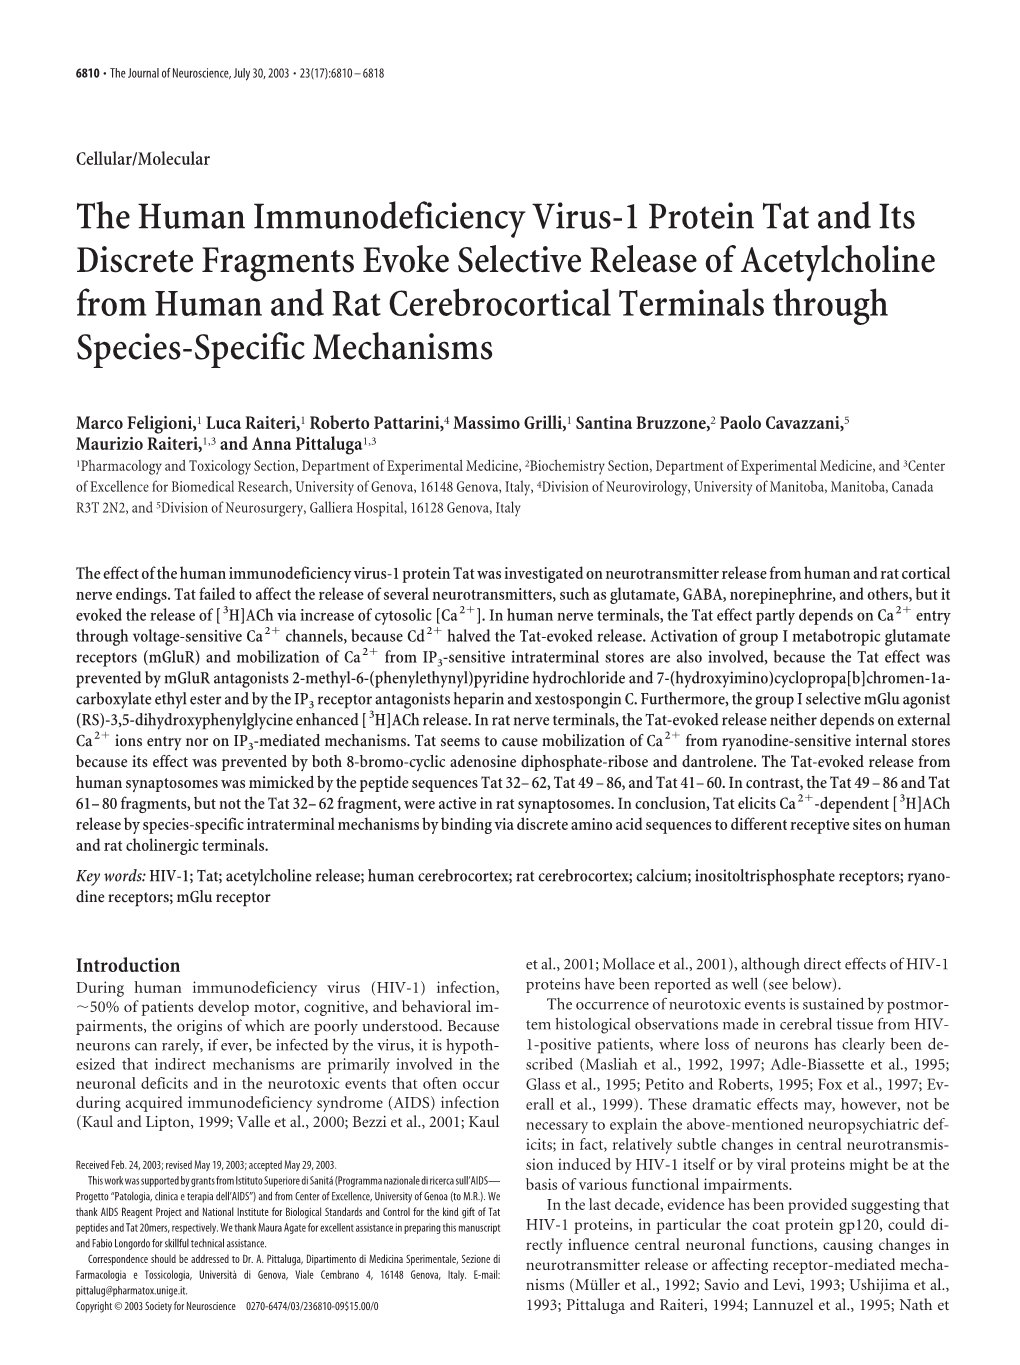 The Human Immunodeficiency Virus-1 Protein Tat and Its Discrete